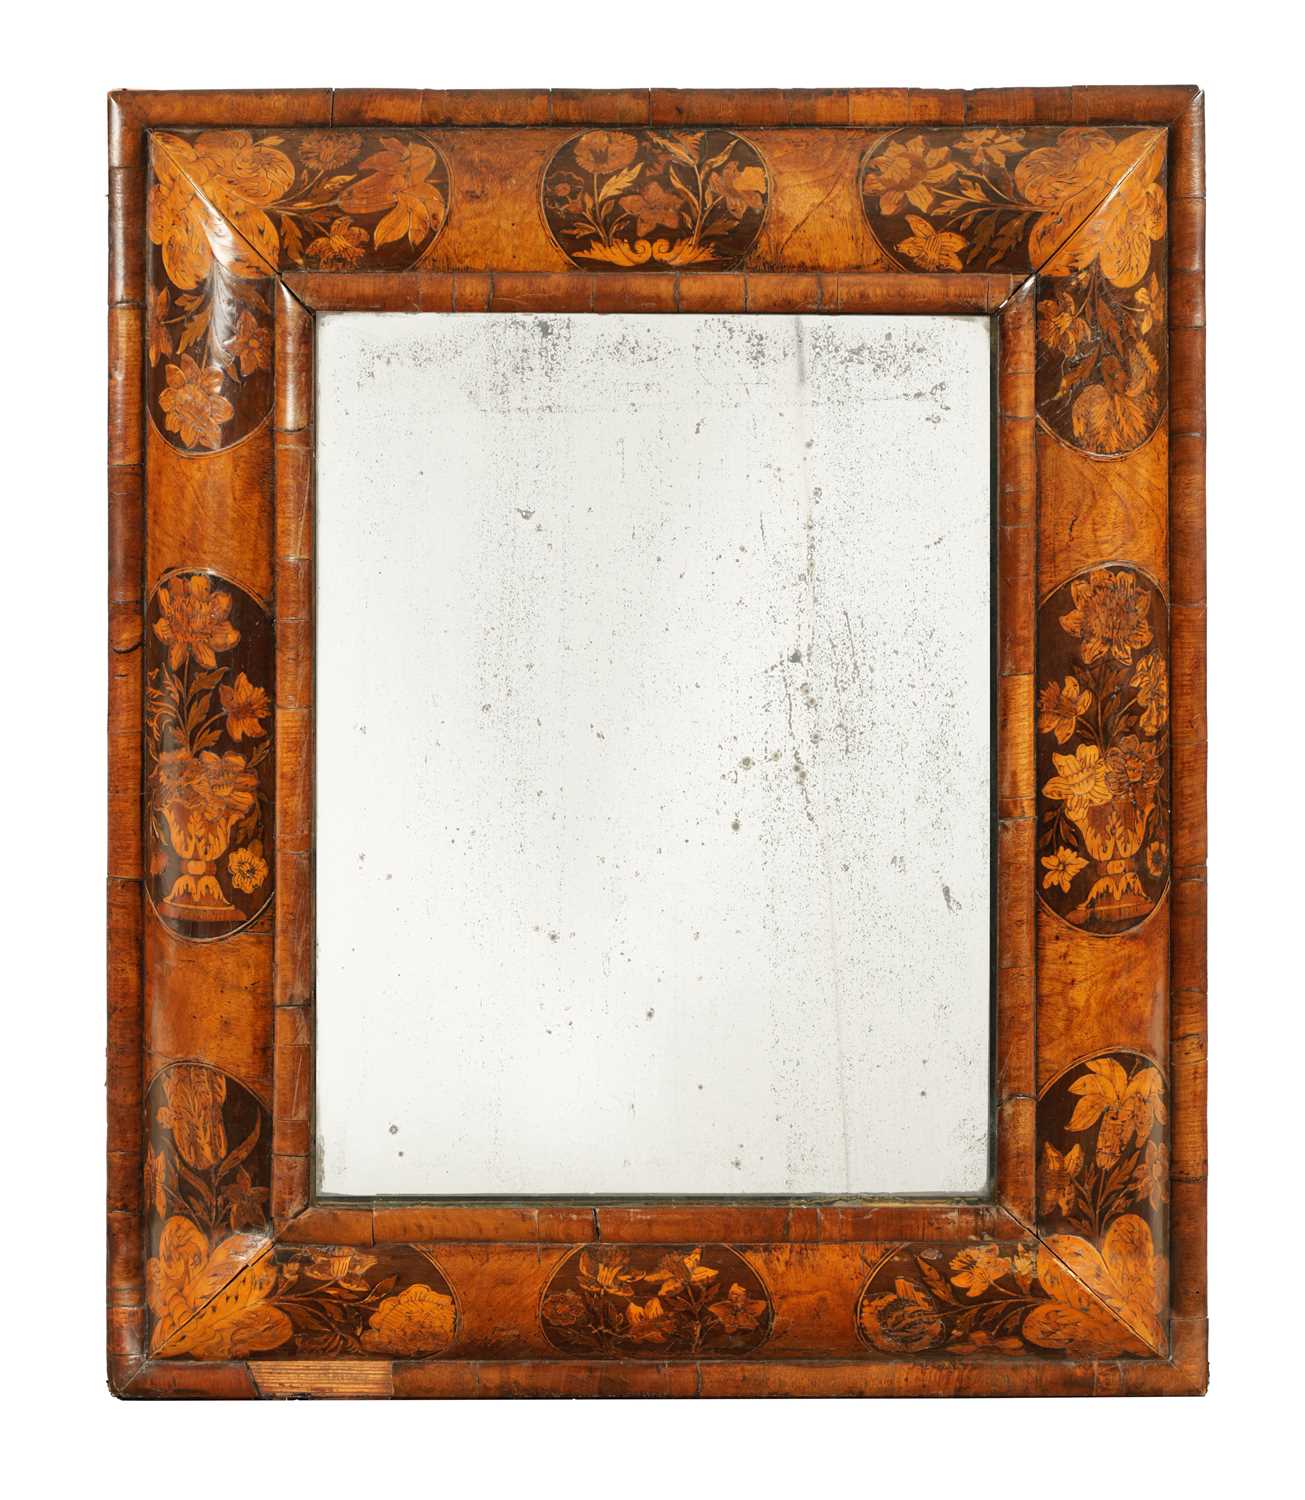 Lot 891 - A LATE 17TH CENTURY WILLIAM AND MARY MARQUETRY PANELLED WALNUT HANGING MIRROR OF LARGE SIZE